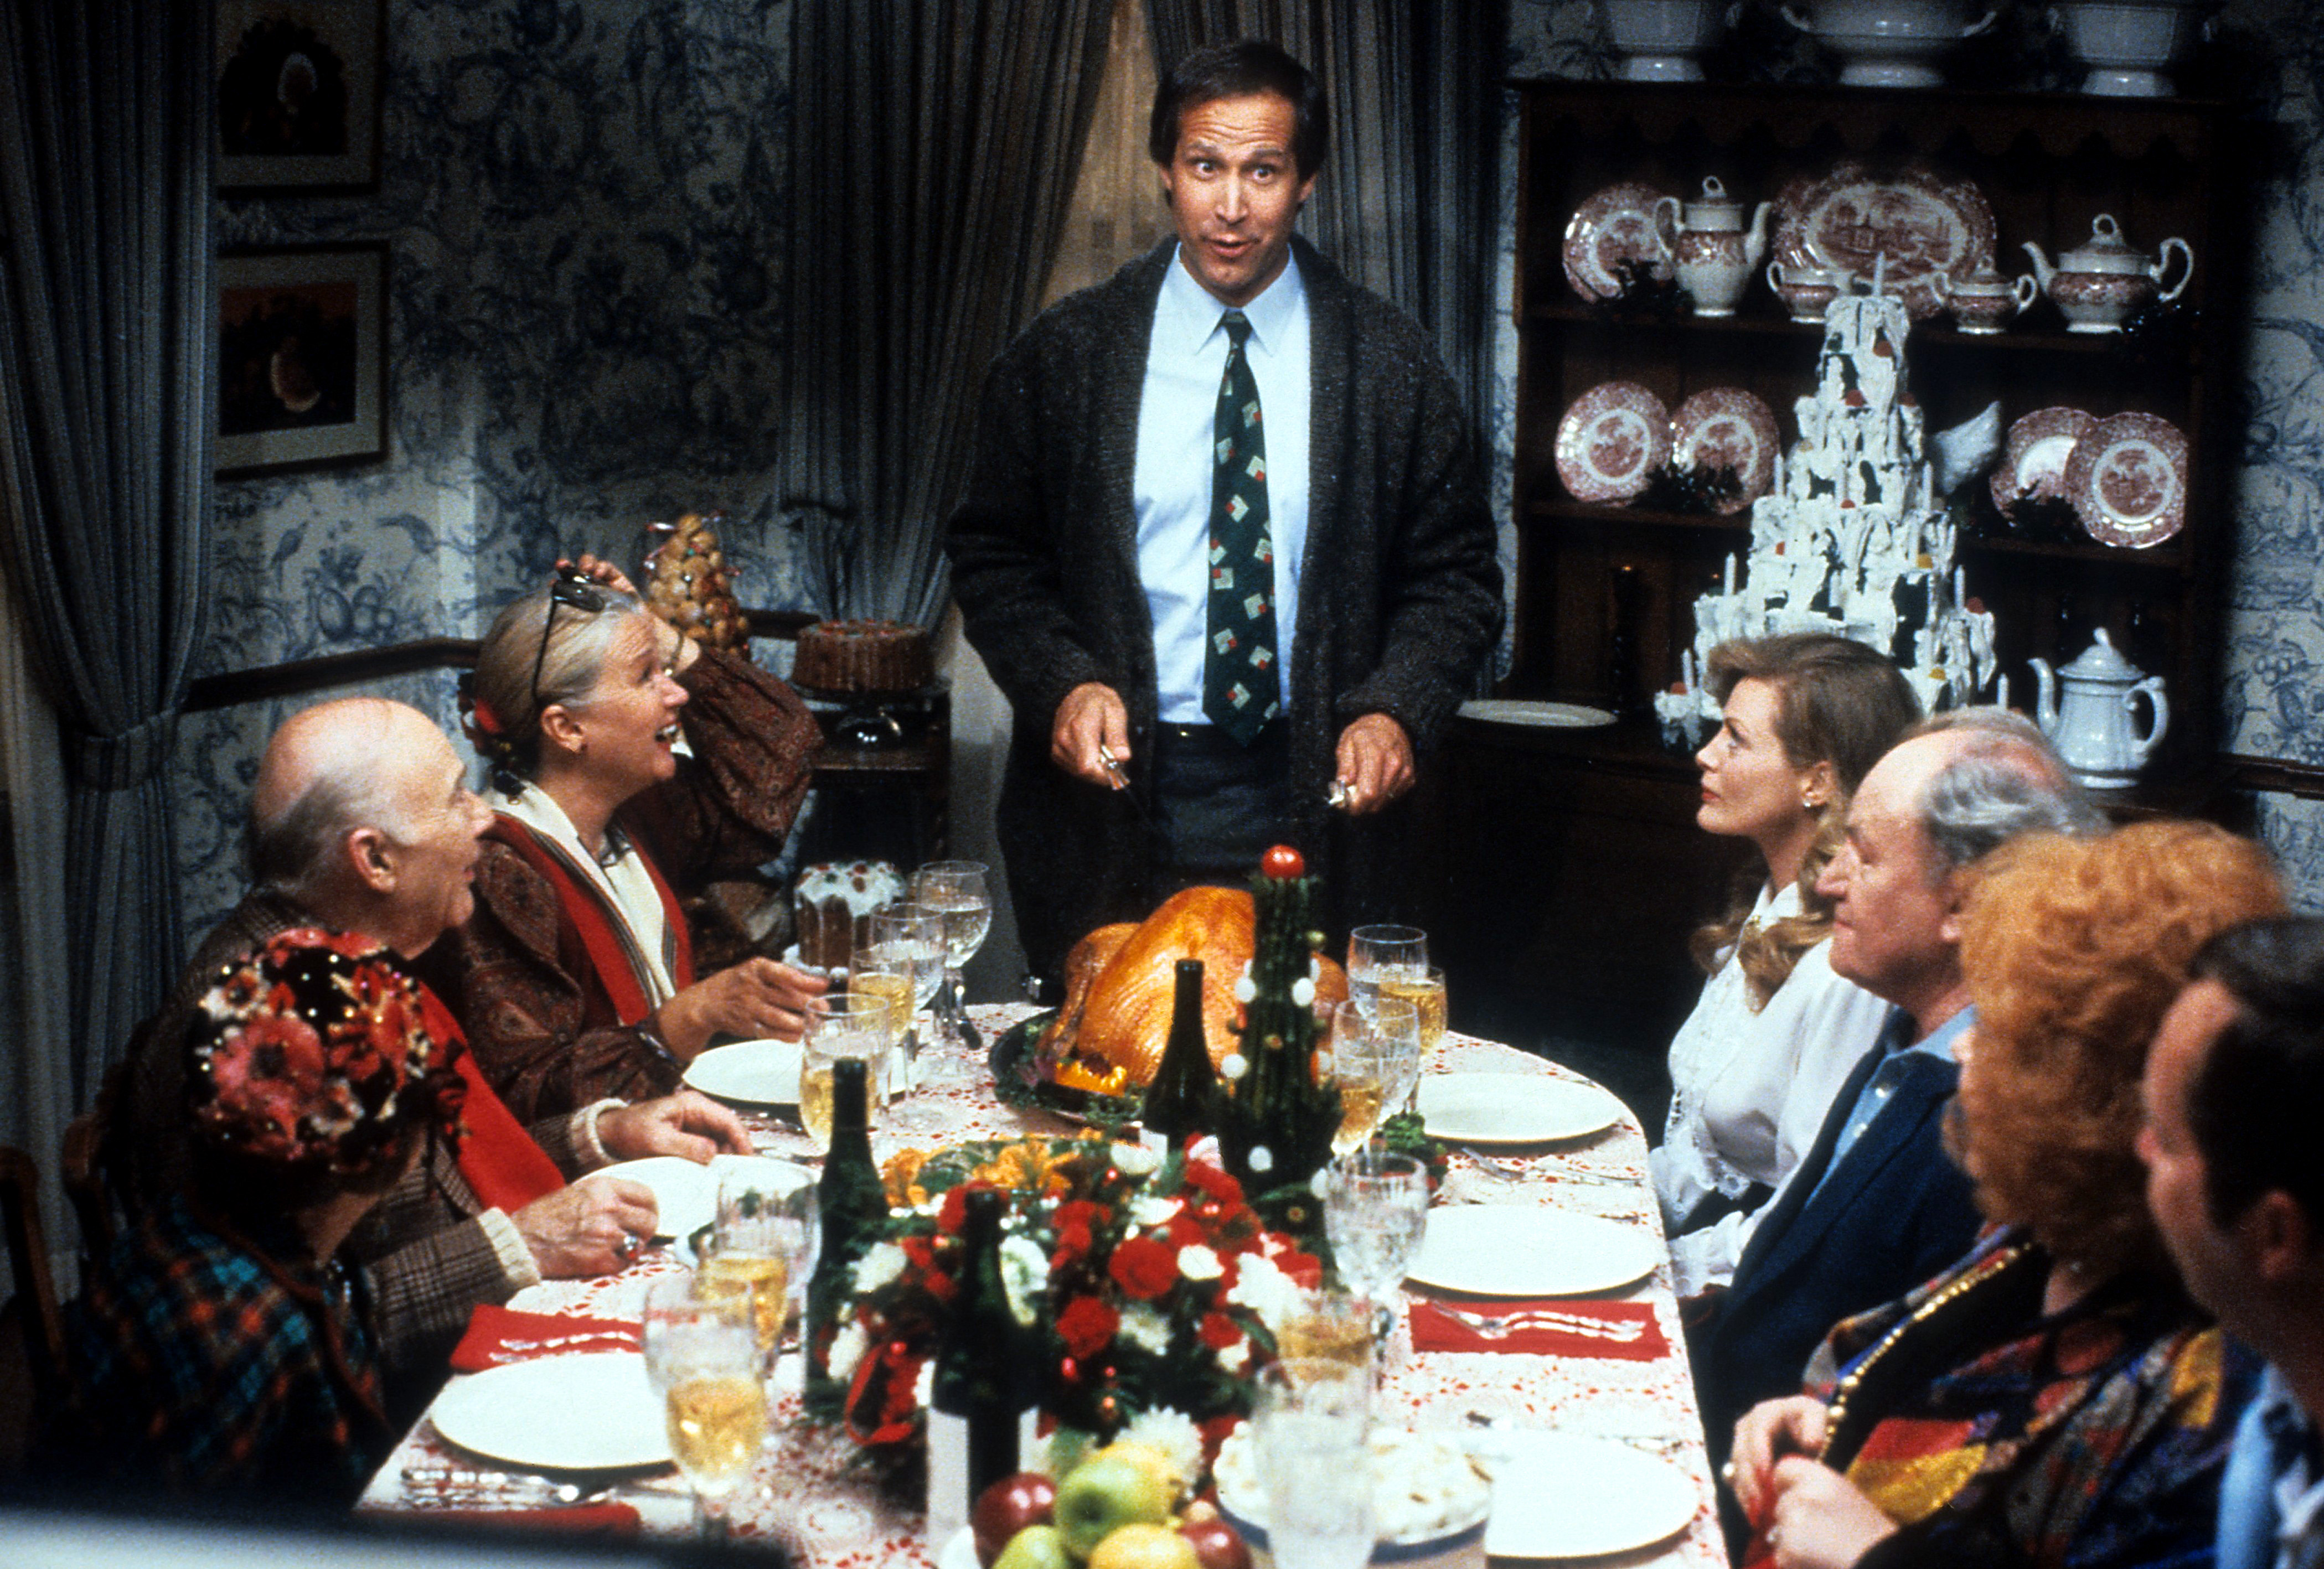 Chevy Chase stands at the head of the table in a scene from the film "National Lampoon's Christmas Vacation" in 1989. | Source: Getty Images